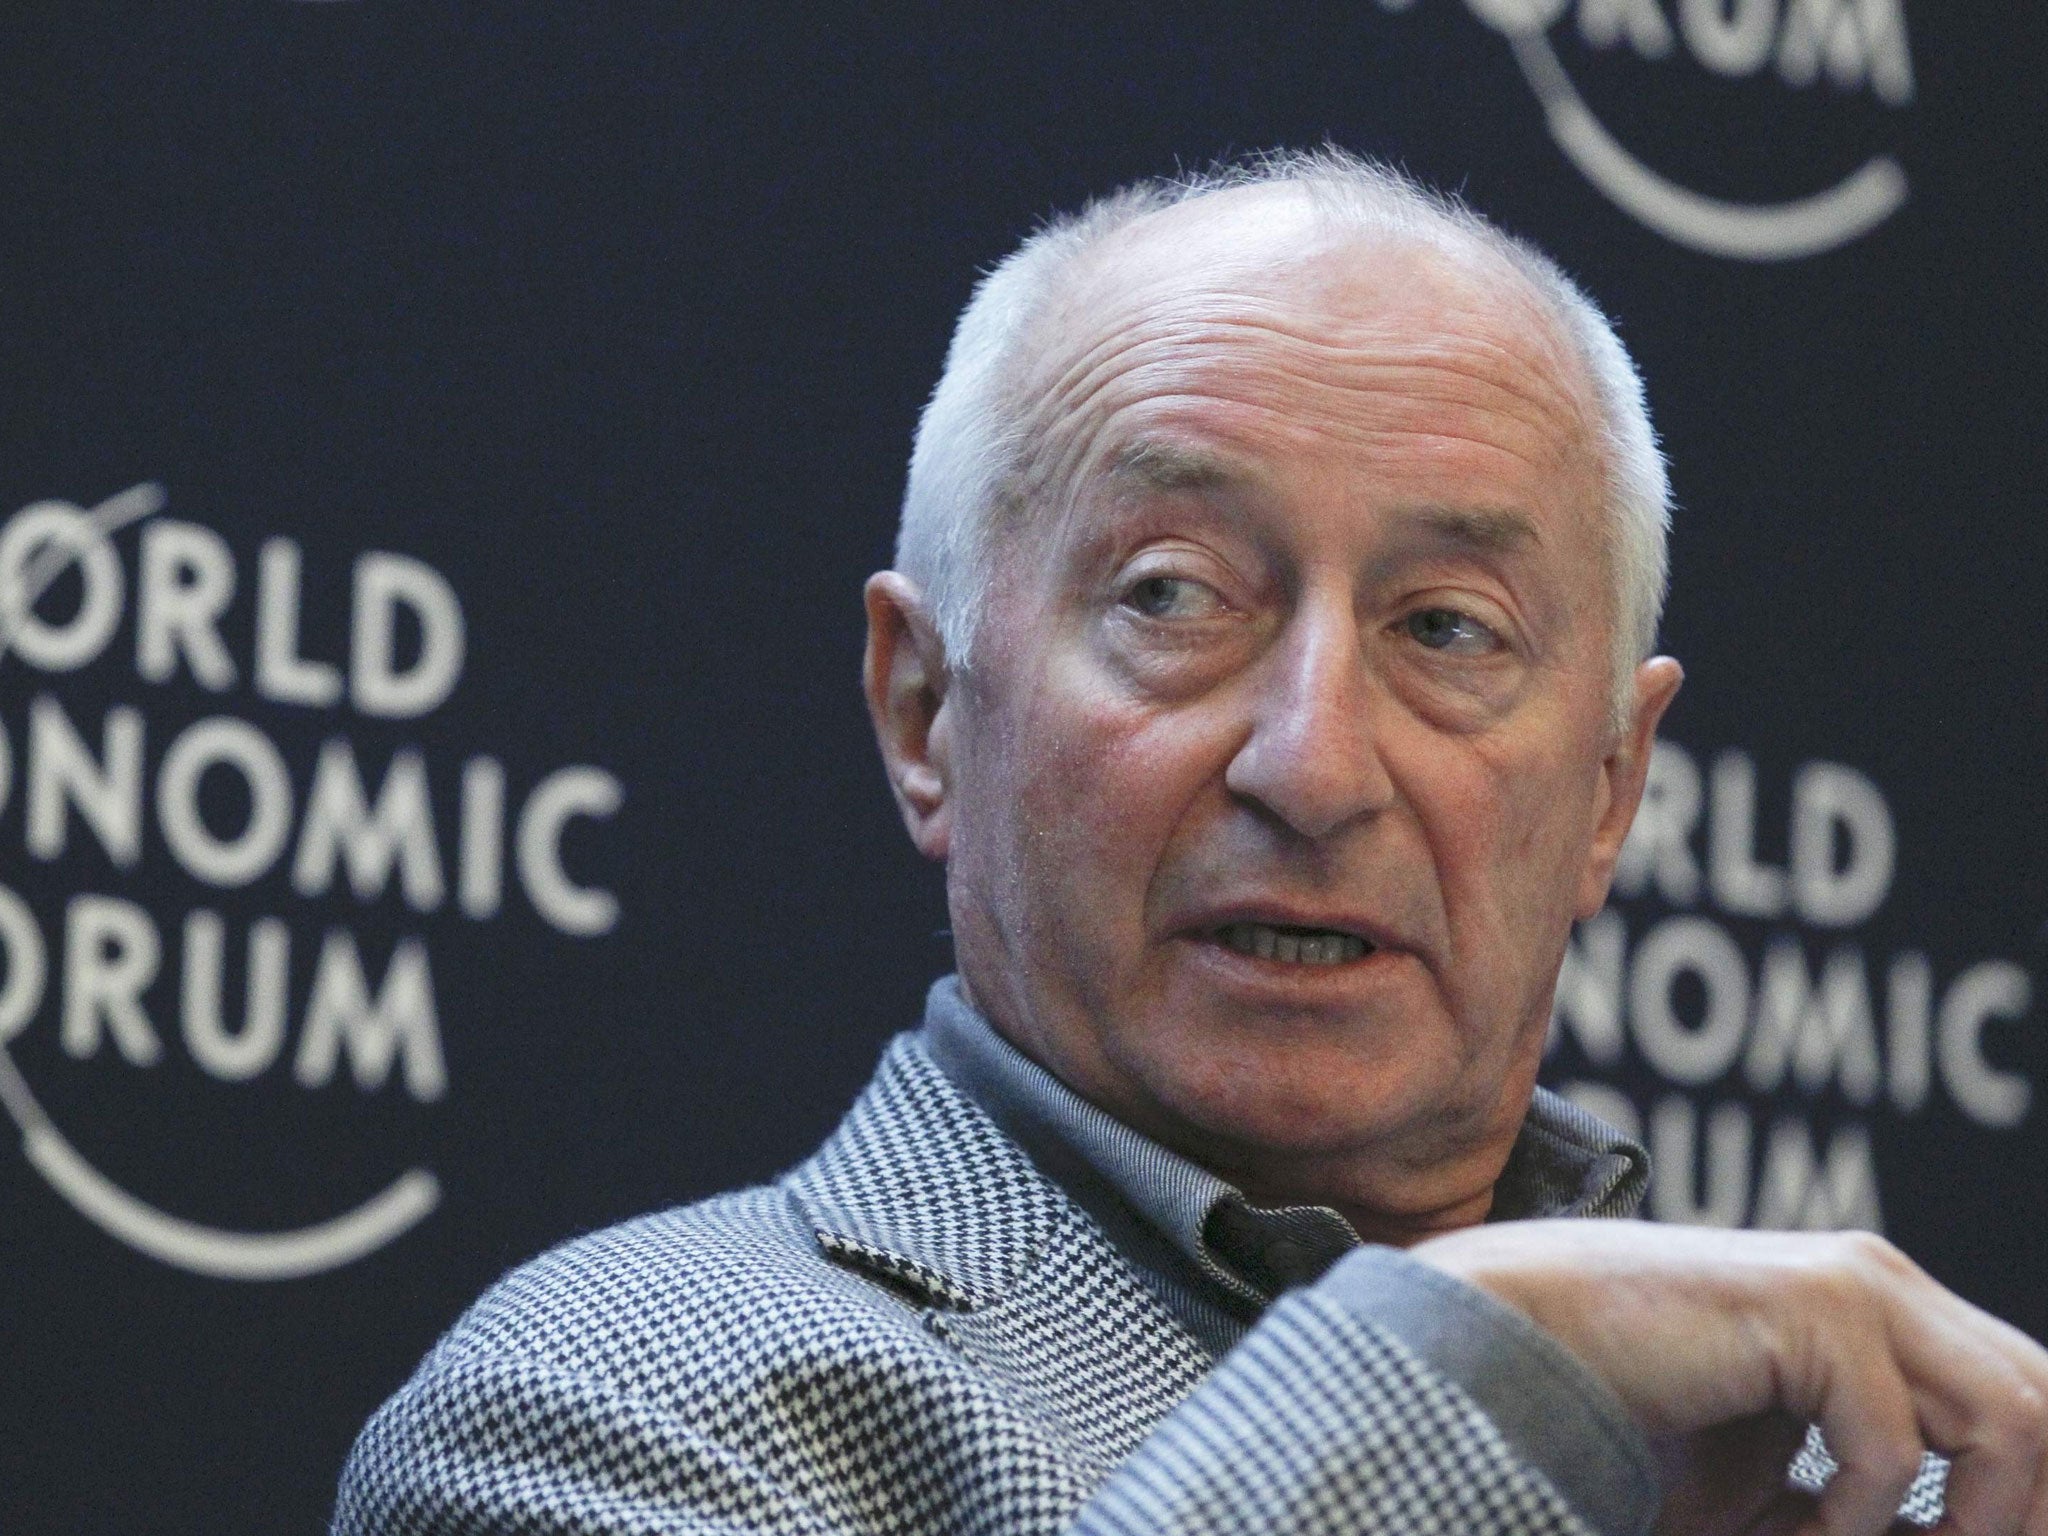 Mackay in Davos in 2012; he was seen as visionary, cerebral and measured